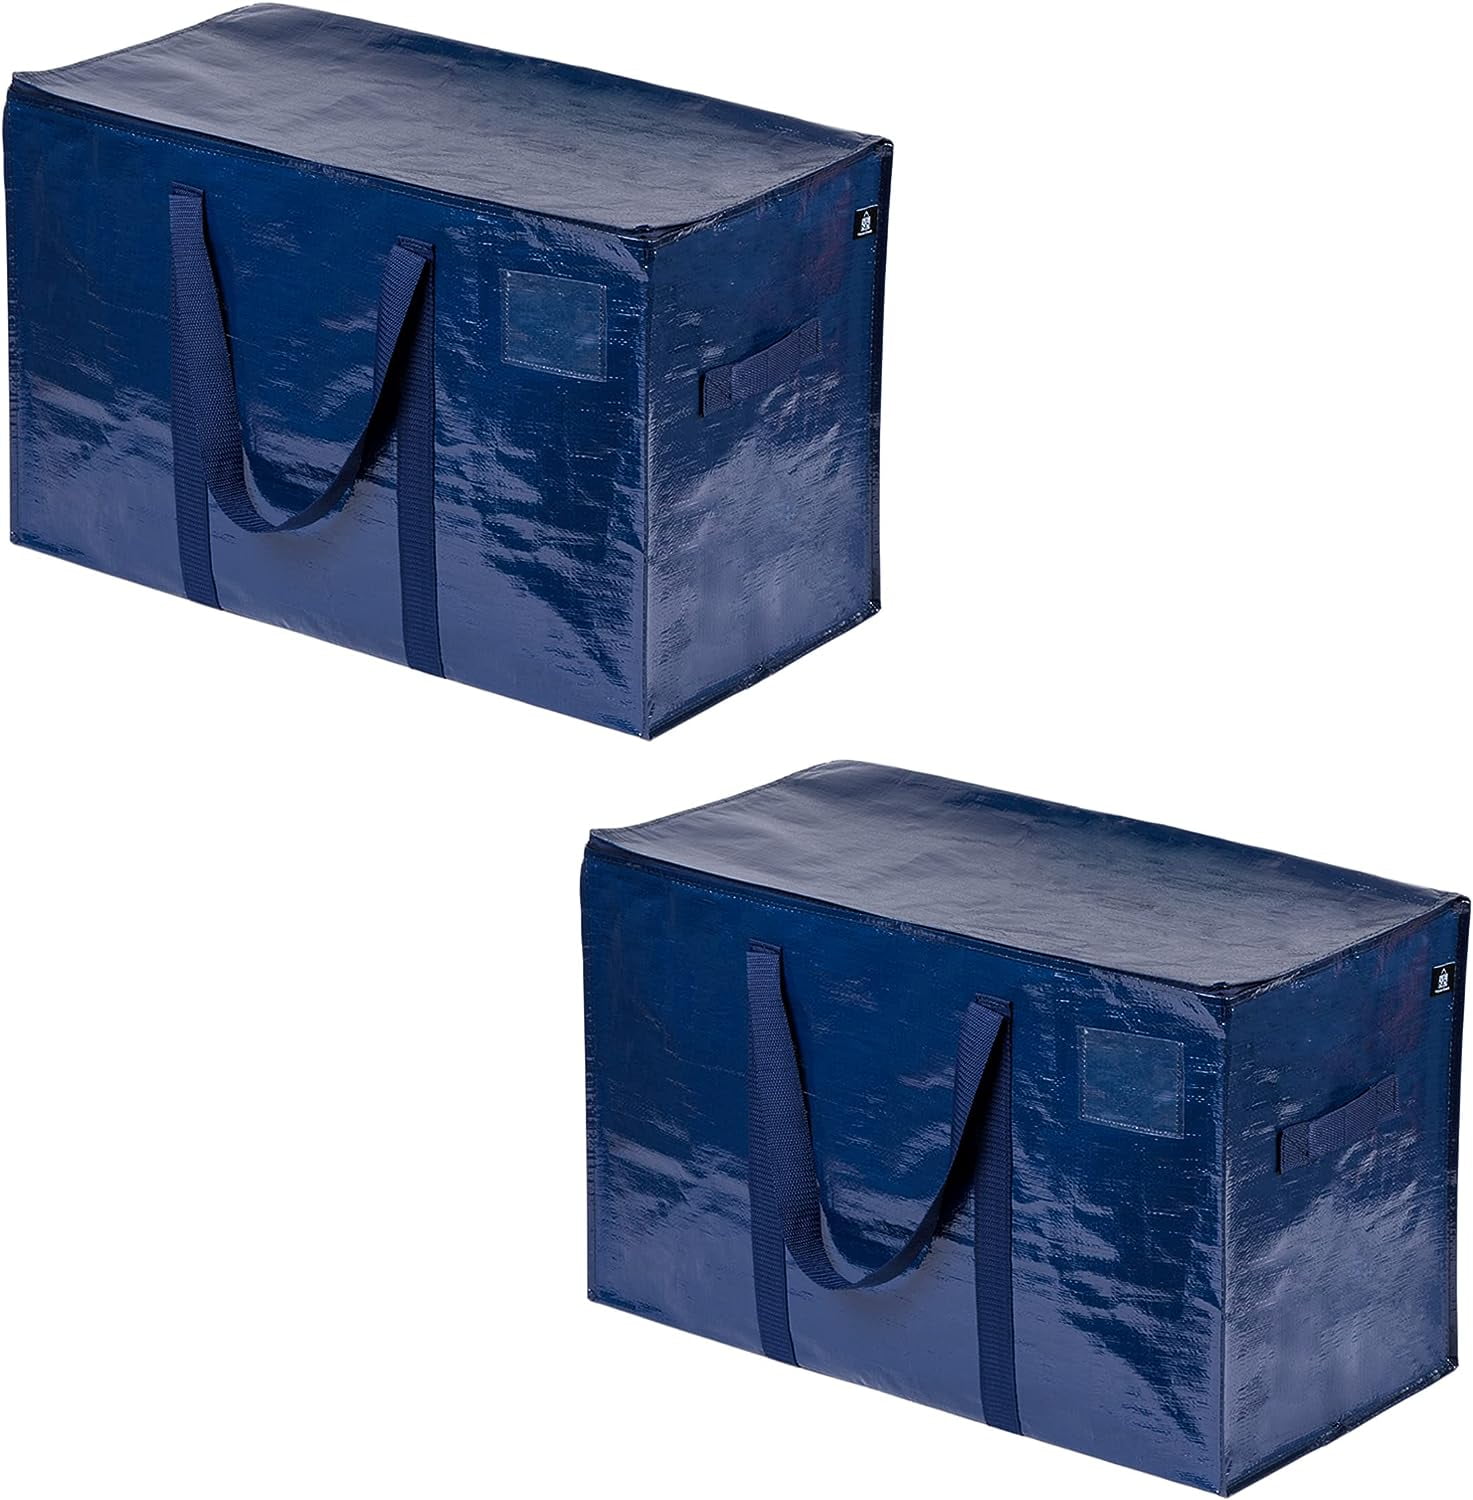 Primo Moving Bags Heavy Duty Extra Large Packing Bags for Moving and  Storage Totes - Reusable Alternative to Moving Boxes with Strong Handles 